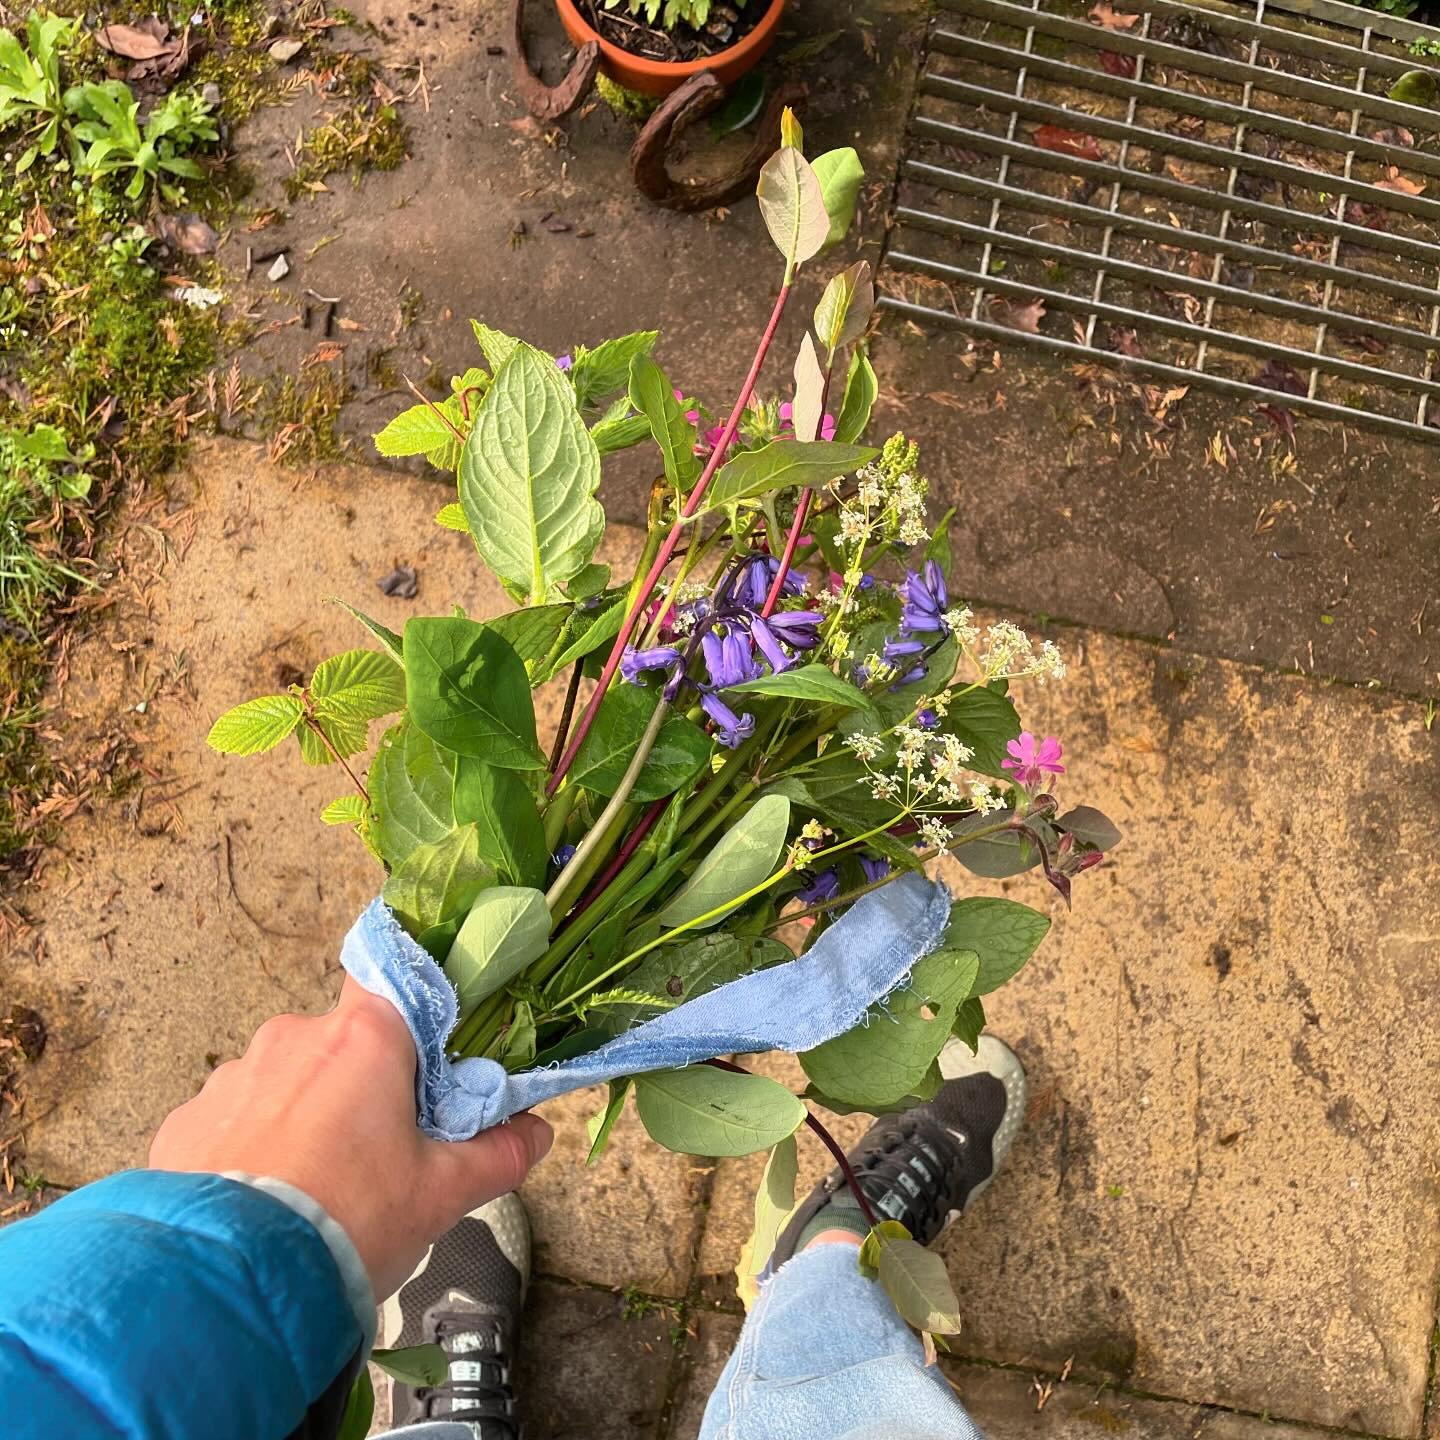 A May Day bunch for the studio. Picked from our wild patch of garden on my way to work 🌱

Happy May Day to you all. I hope you can find a moment today to connect with nature and spy what&rsquo;s going on in the hedgerows 🌿🌞 

I woke up early today